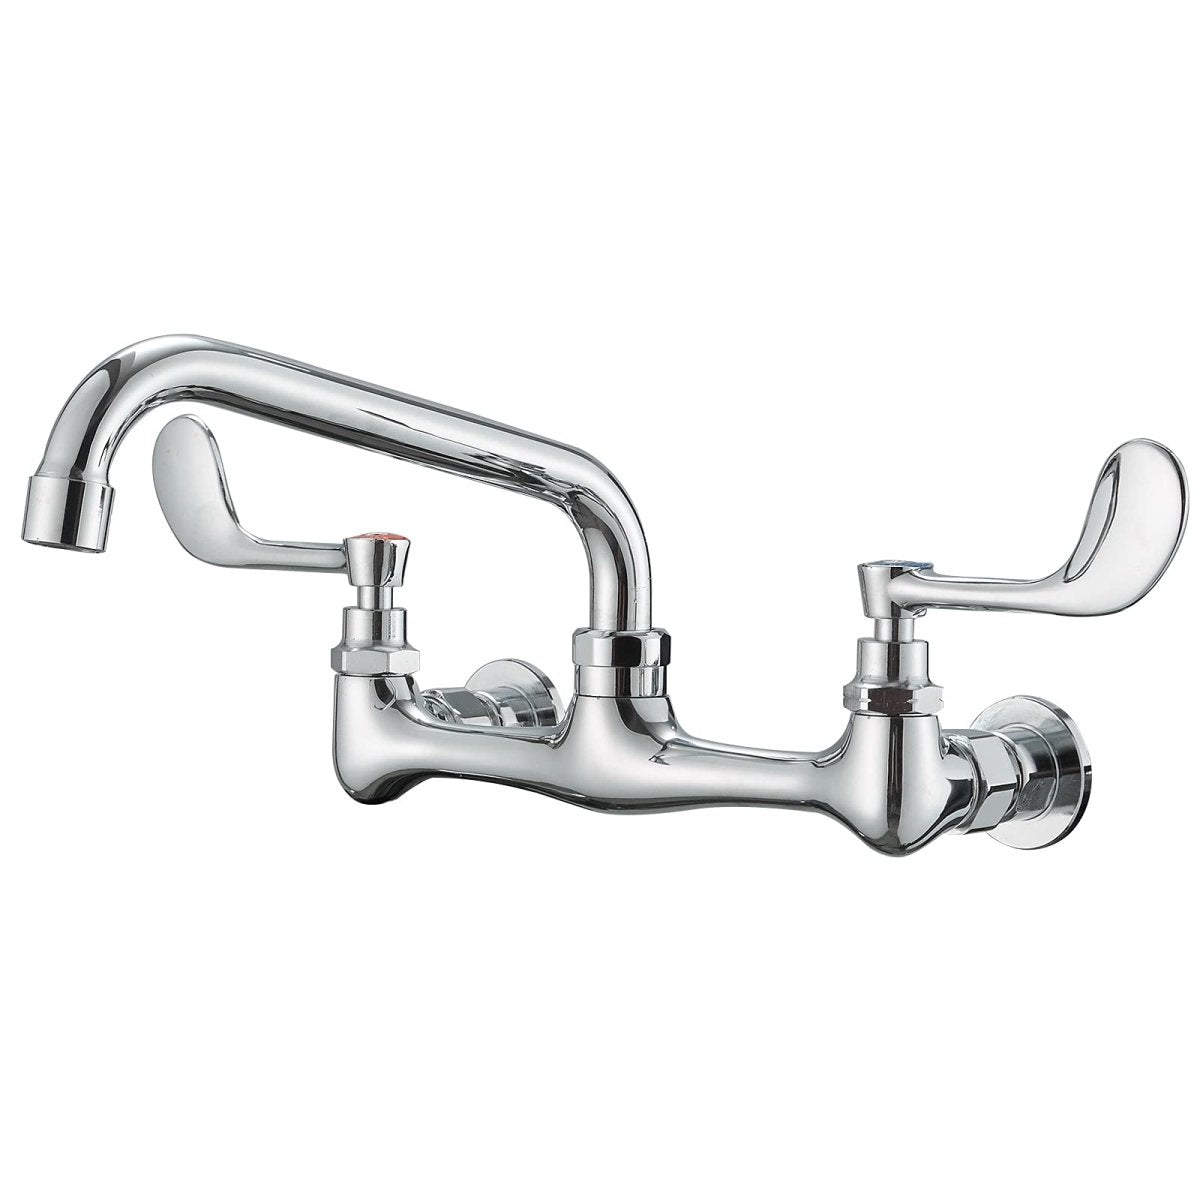 Wall Mount Kitchen Faucet with 8 in Swivel Spout Chrome - buyfaucet.com